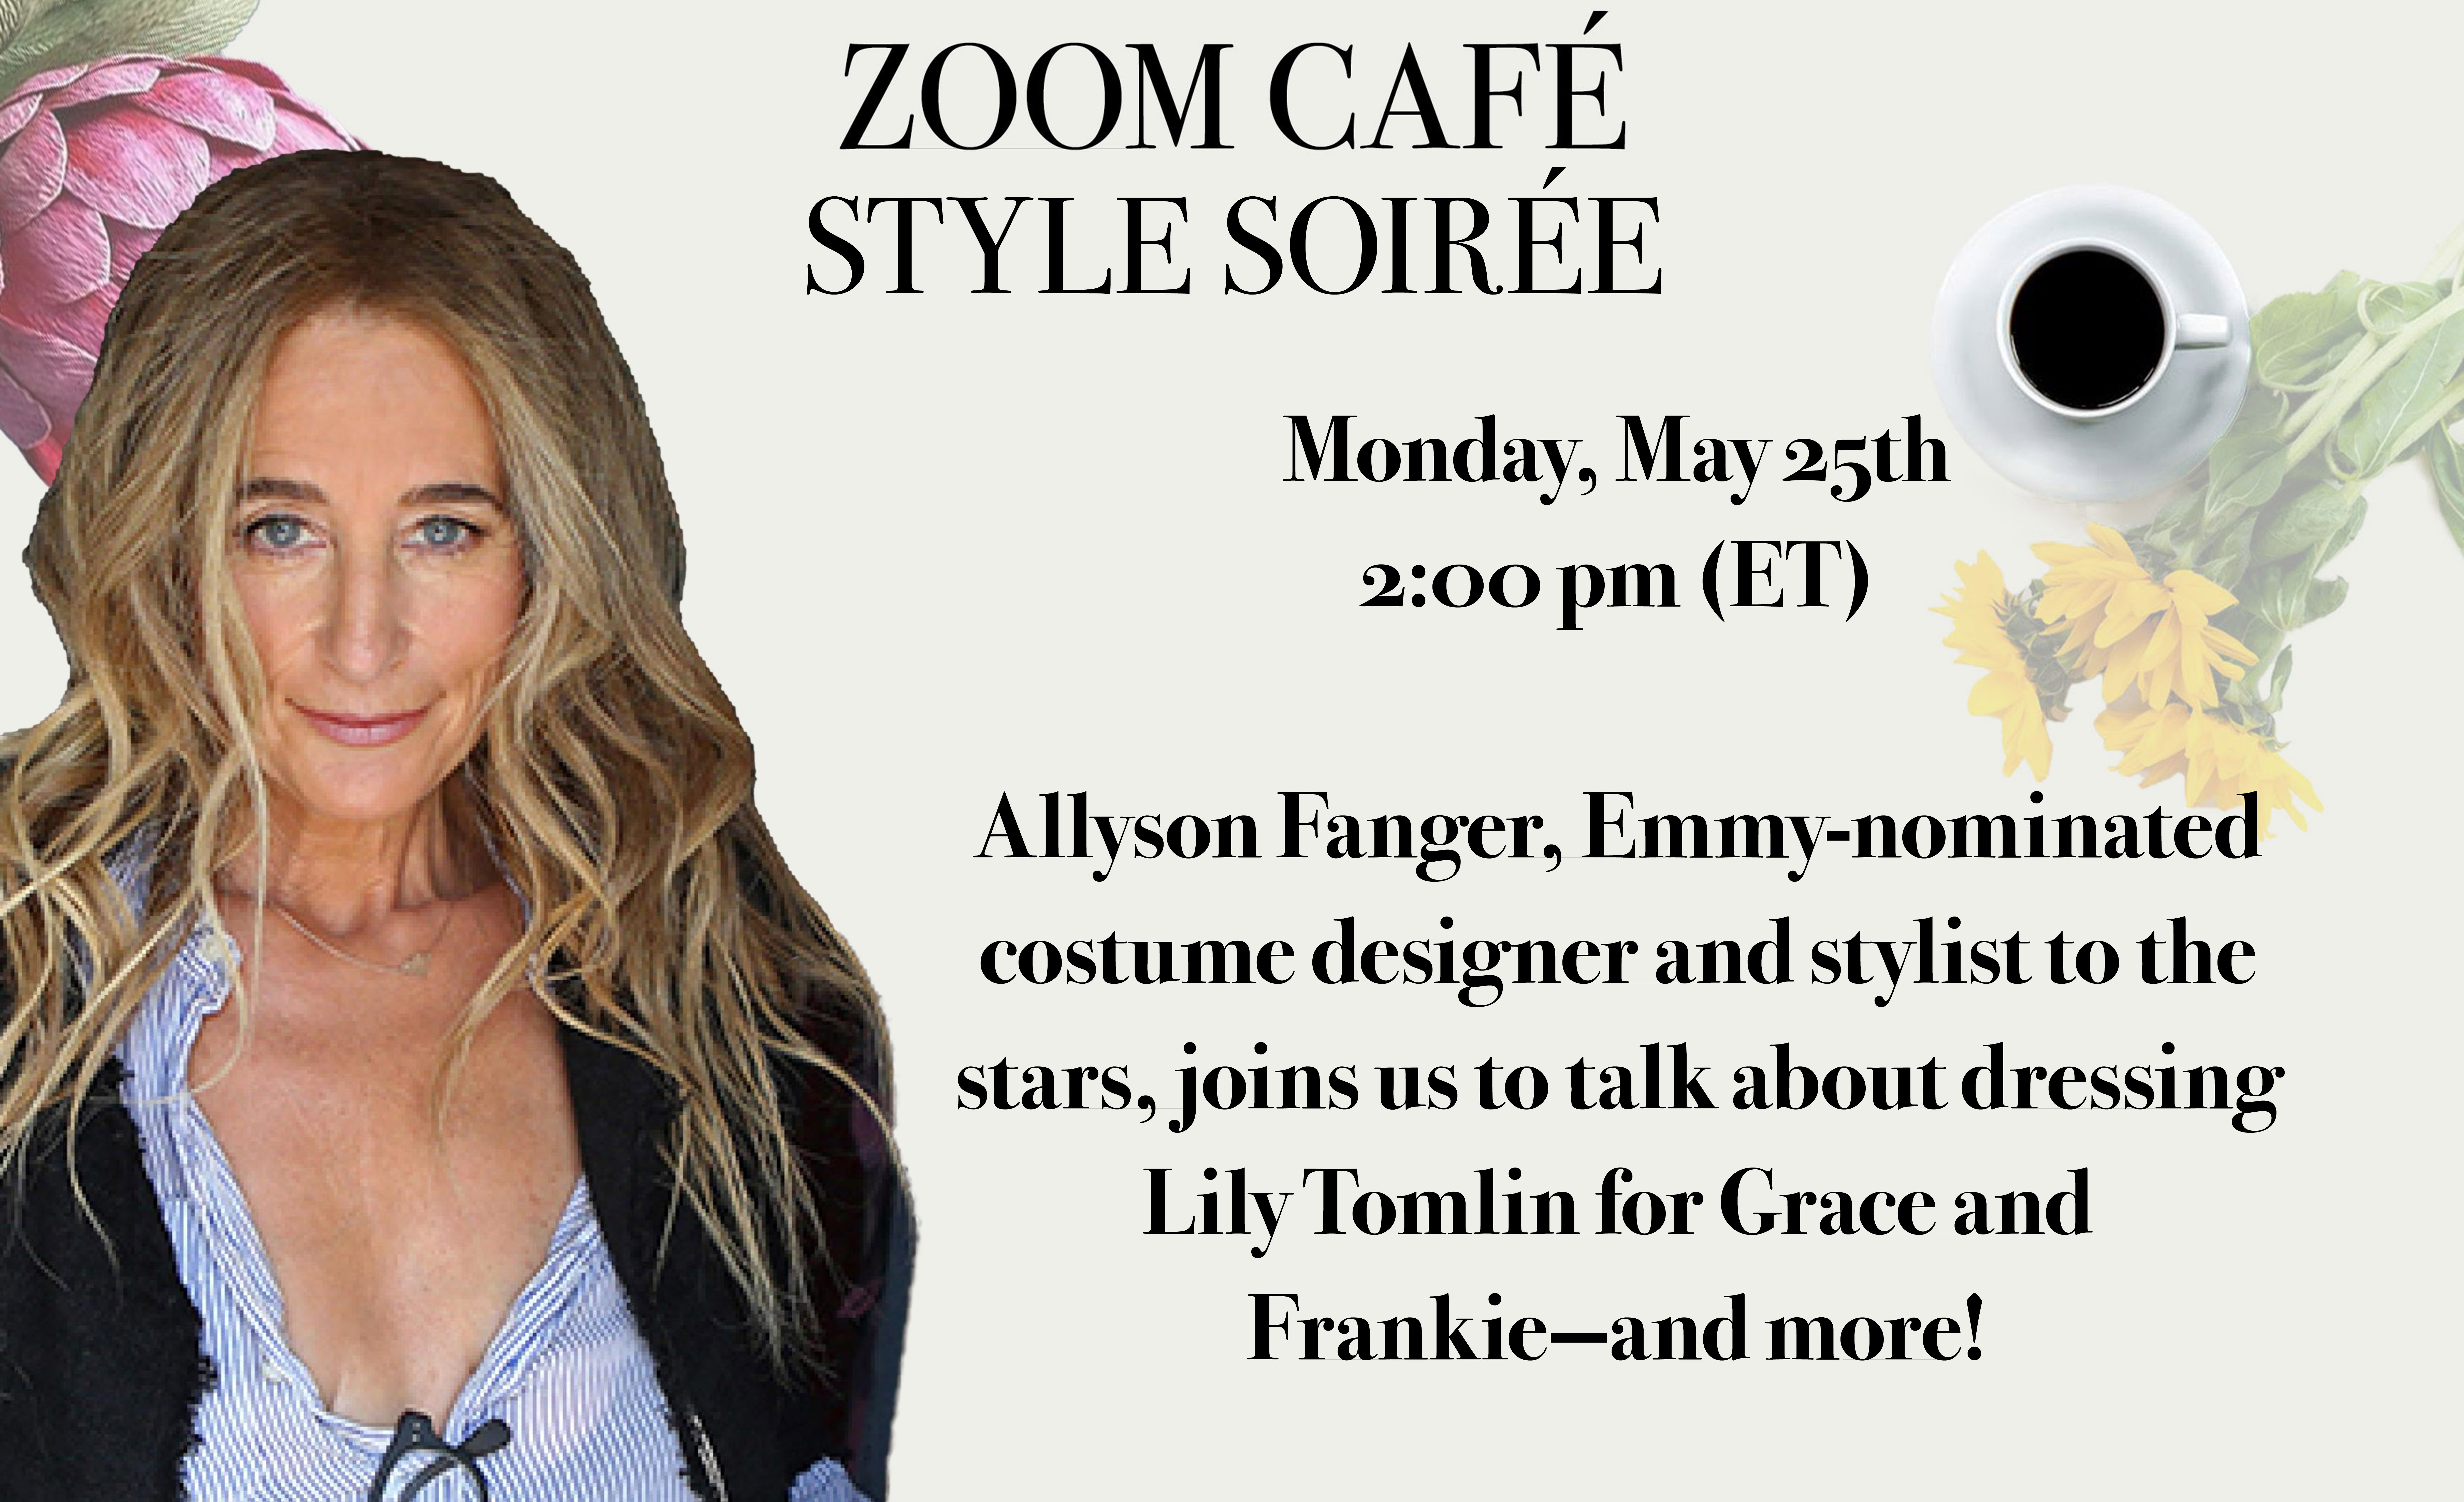 We met star stylist Allyson Fanger to talk about Styling Lily Tomlin for the hit Netflix Show Grace and Frankie.